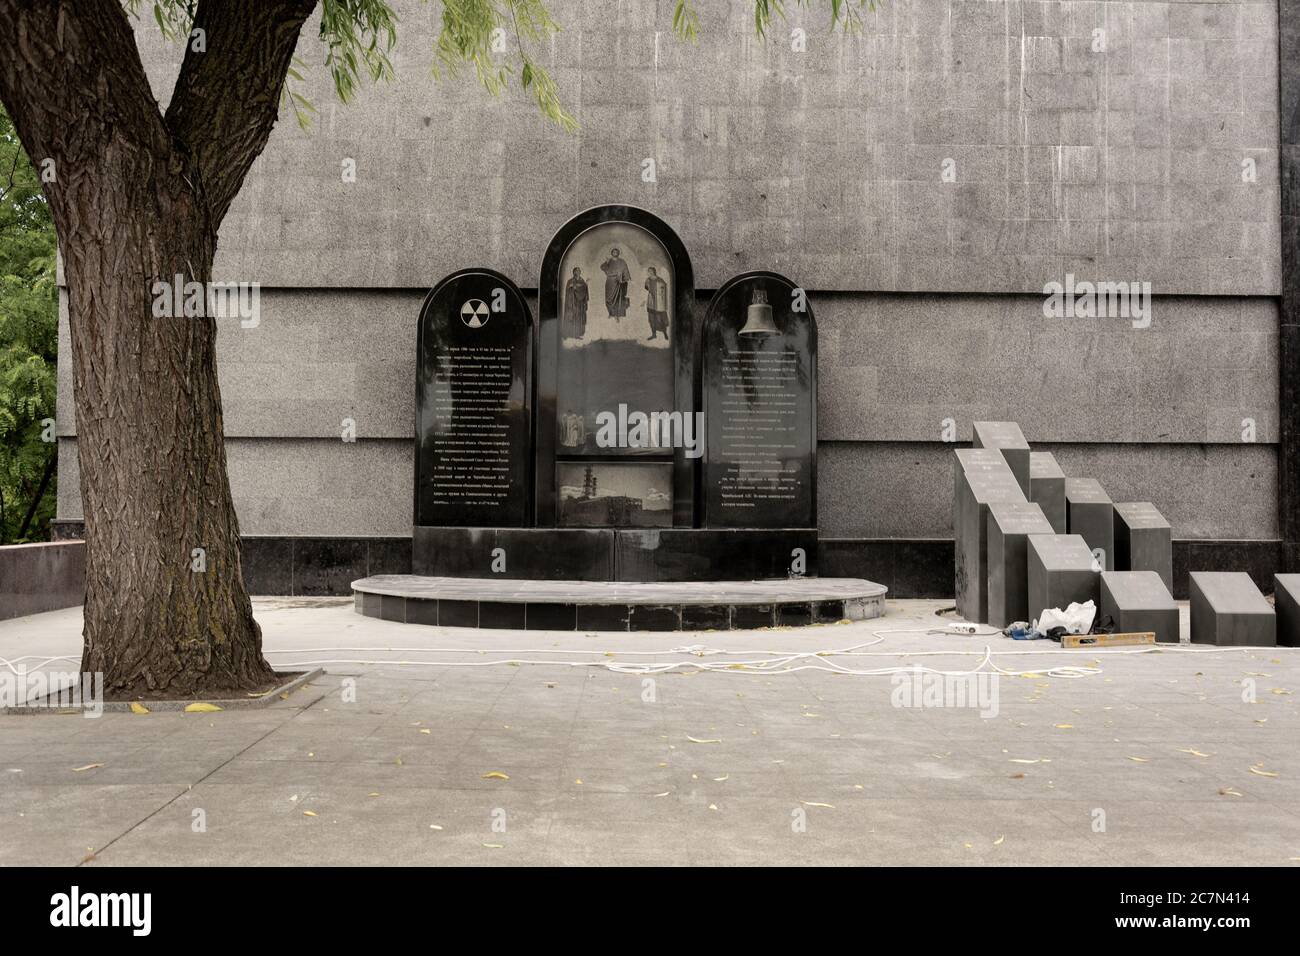 Moldova, Tiraspol - May 28, 2019: Monument to the victims of Chernobyl in the center of the city of Tiraspol. Stock Photo